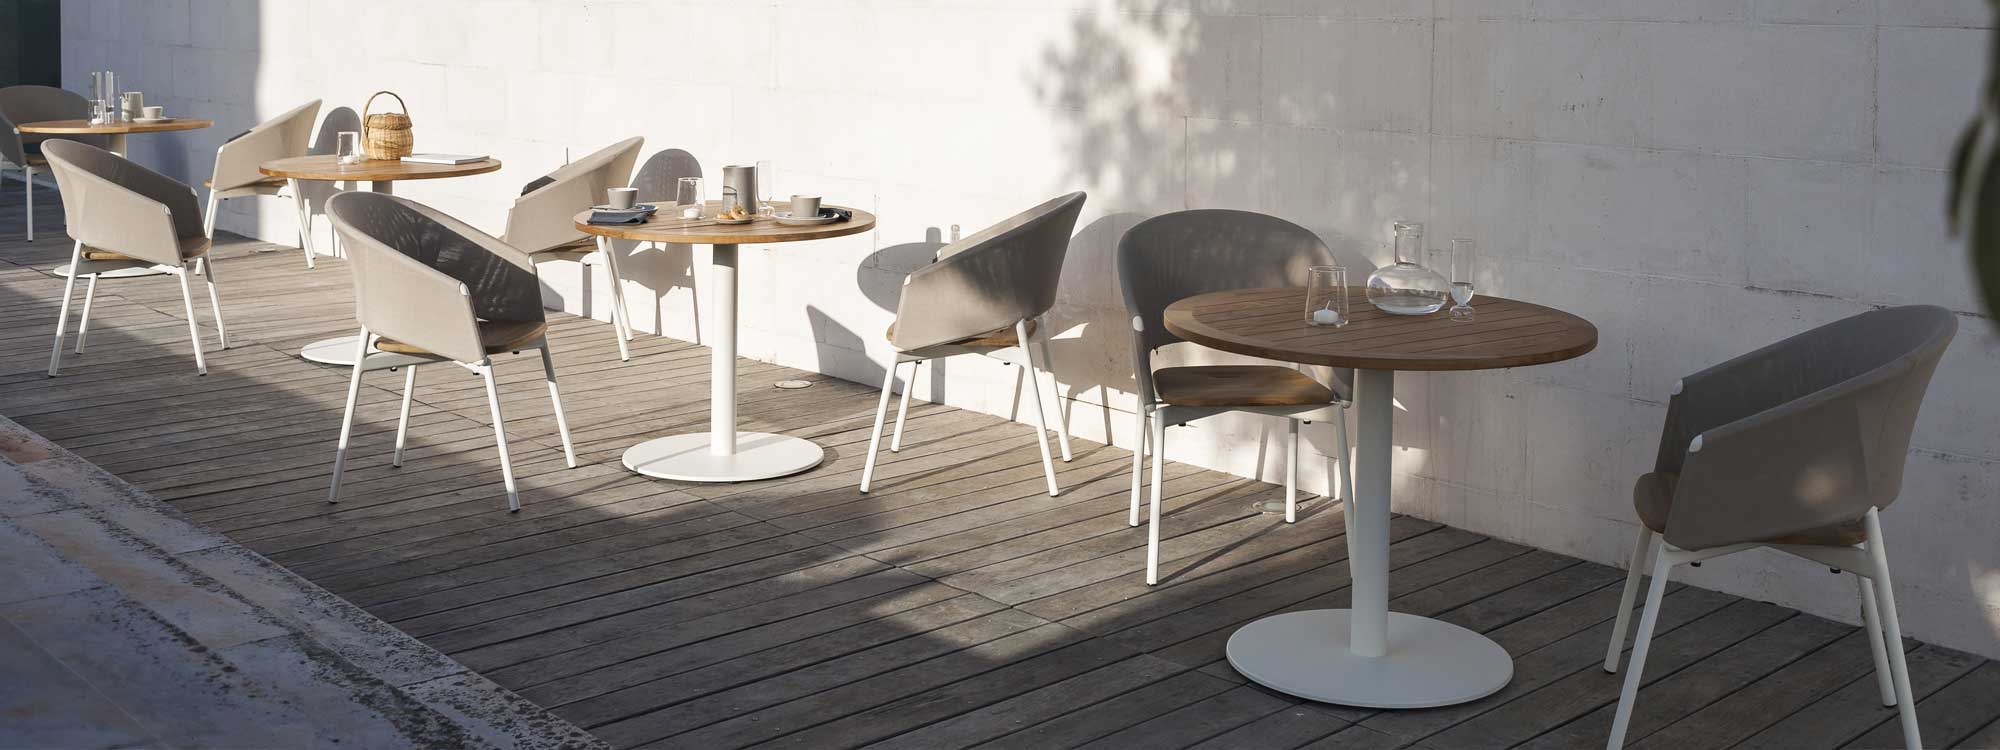 Image of RODA Piper Comfort tub chairs with White frame and Sand Batyline back, together with Stem white bistro tables with circular teak table tops